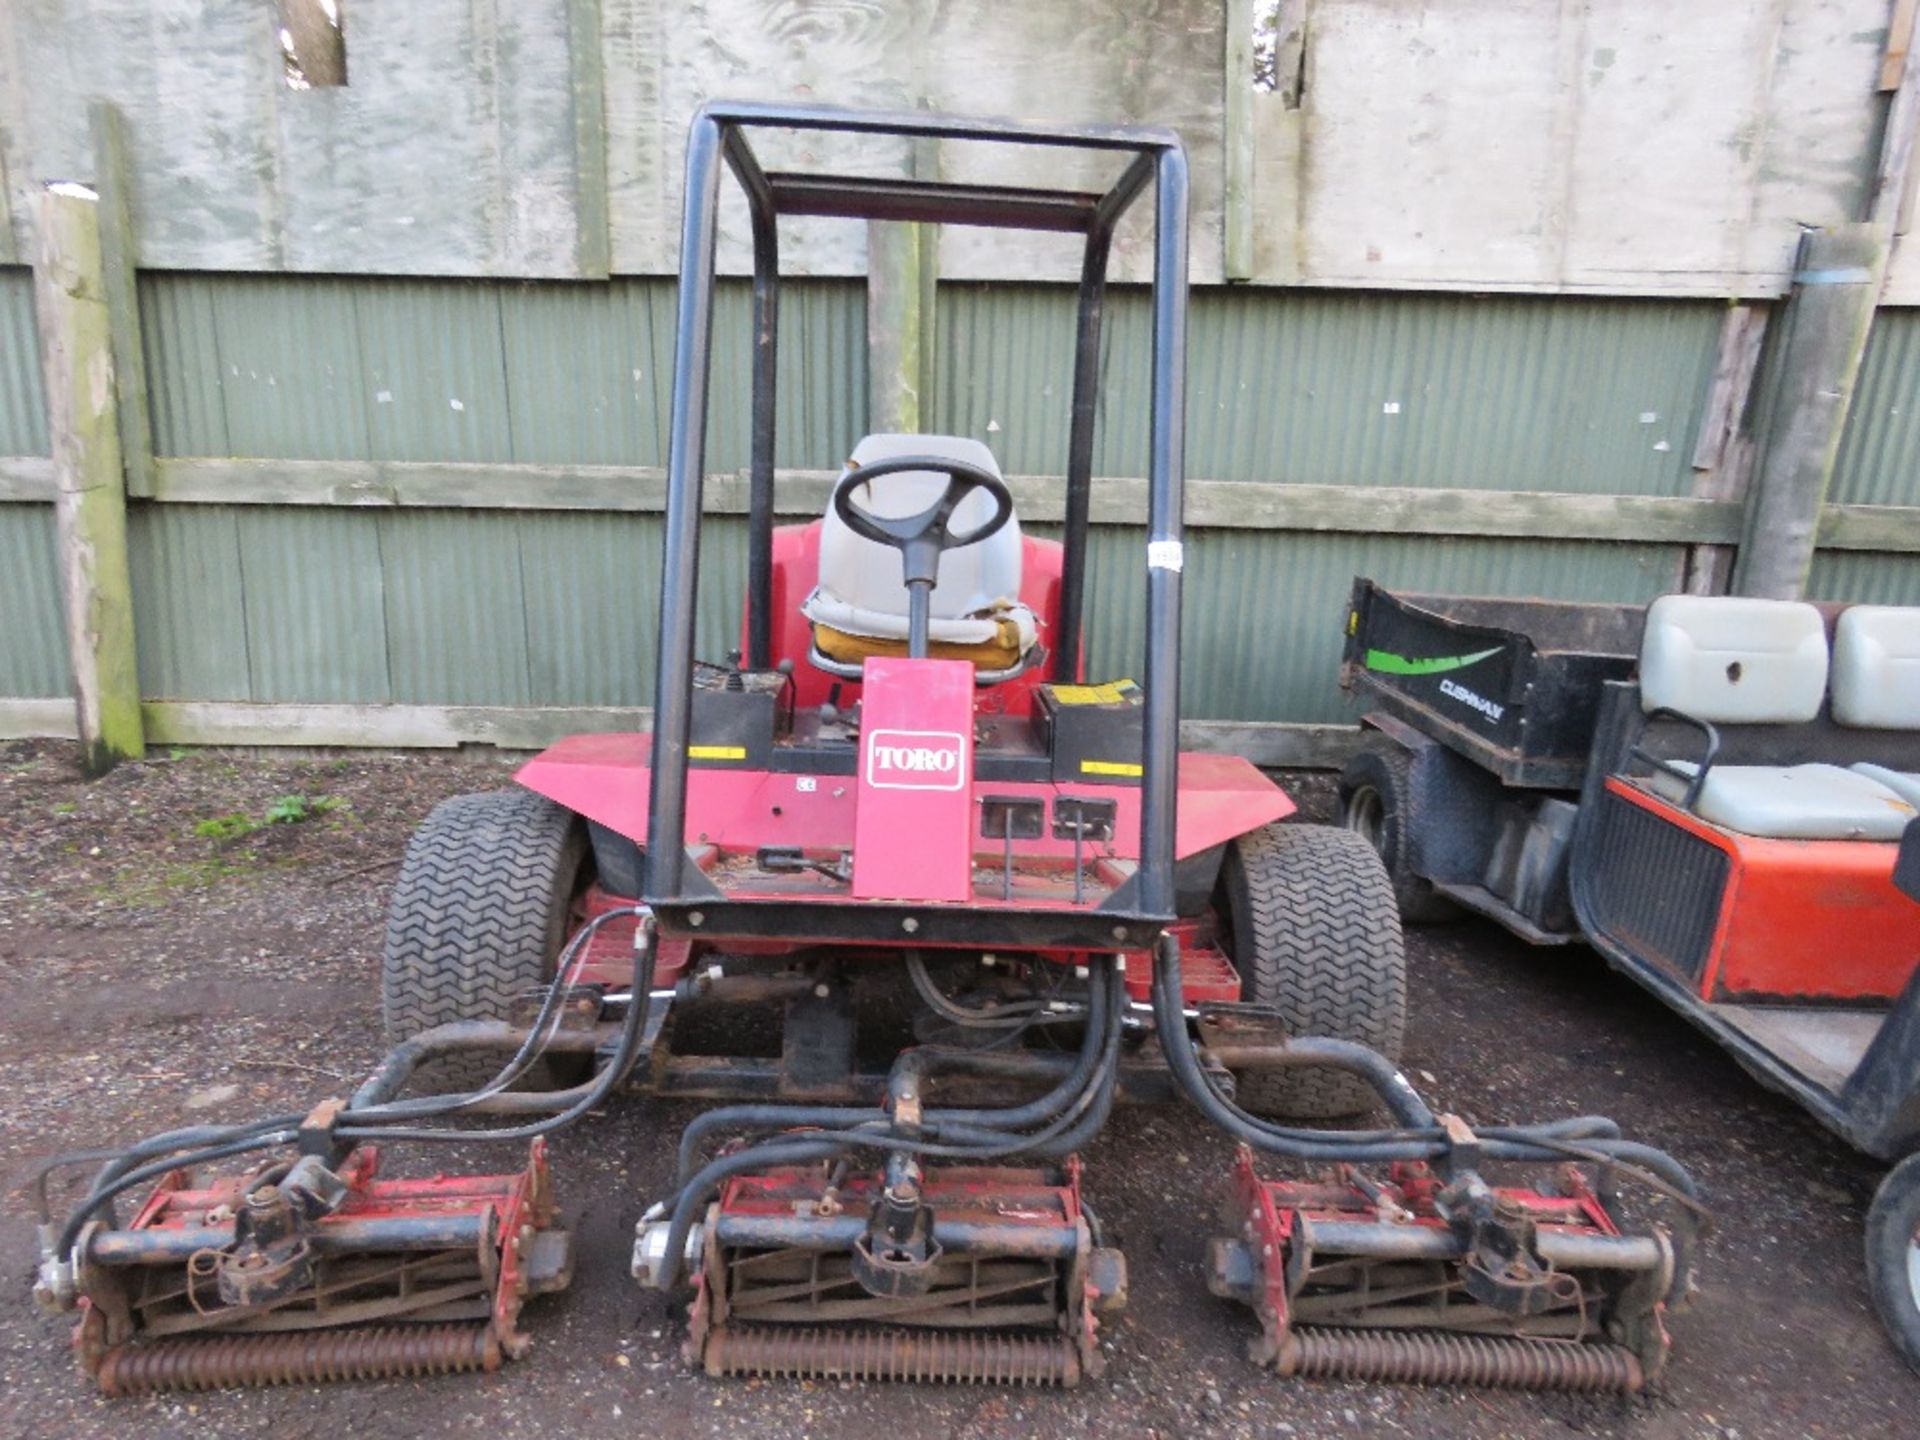 TORO REELMASTER 6500D 5 GANG 4WD MOWER, EX GOLF COURSE. WHEN TESTED WAS SEEN TO RUN, DRIVE AND BLADE